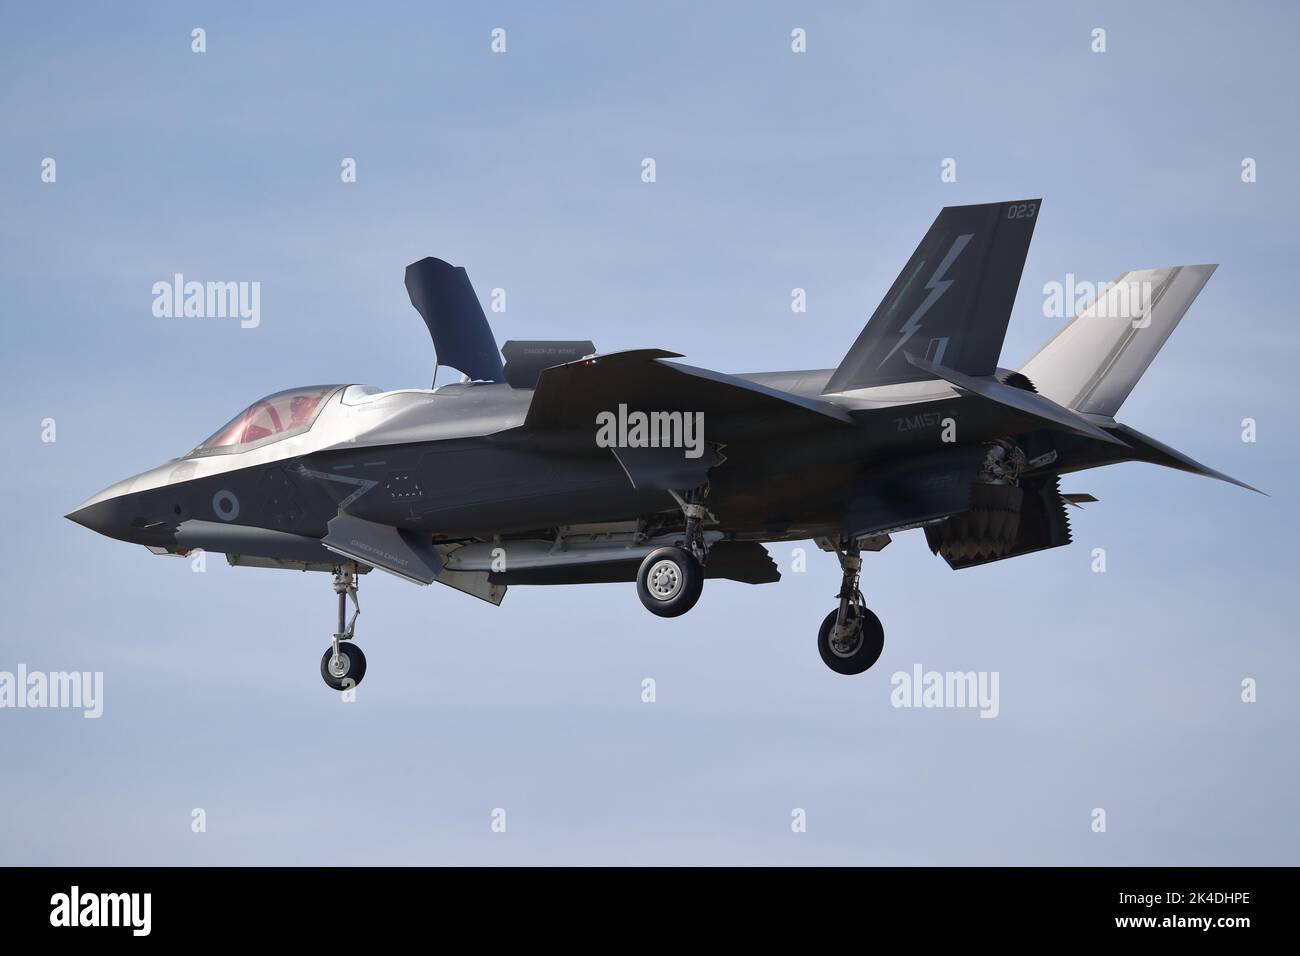 Fairford, UK, 16th July 2022, Military aircraft from across the globe on display for the RIAT Royal International Air Tattoo. An RAF Lockheed-Martin F-35B showed its capabilities at RIAT 2022 Royal International Air Tattoo at Fairford, UK Stock Photo